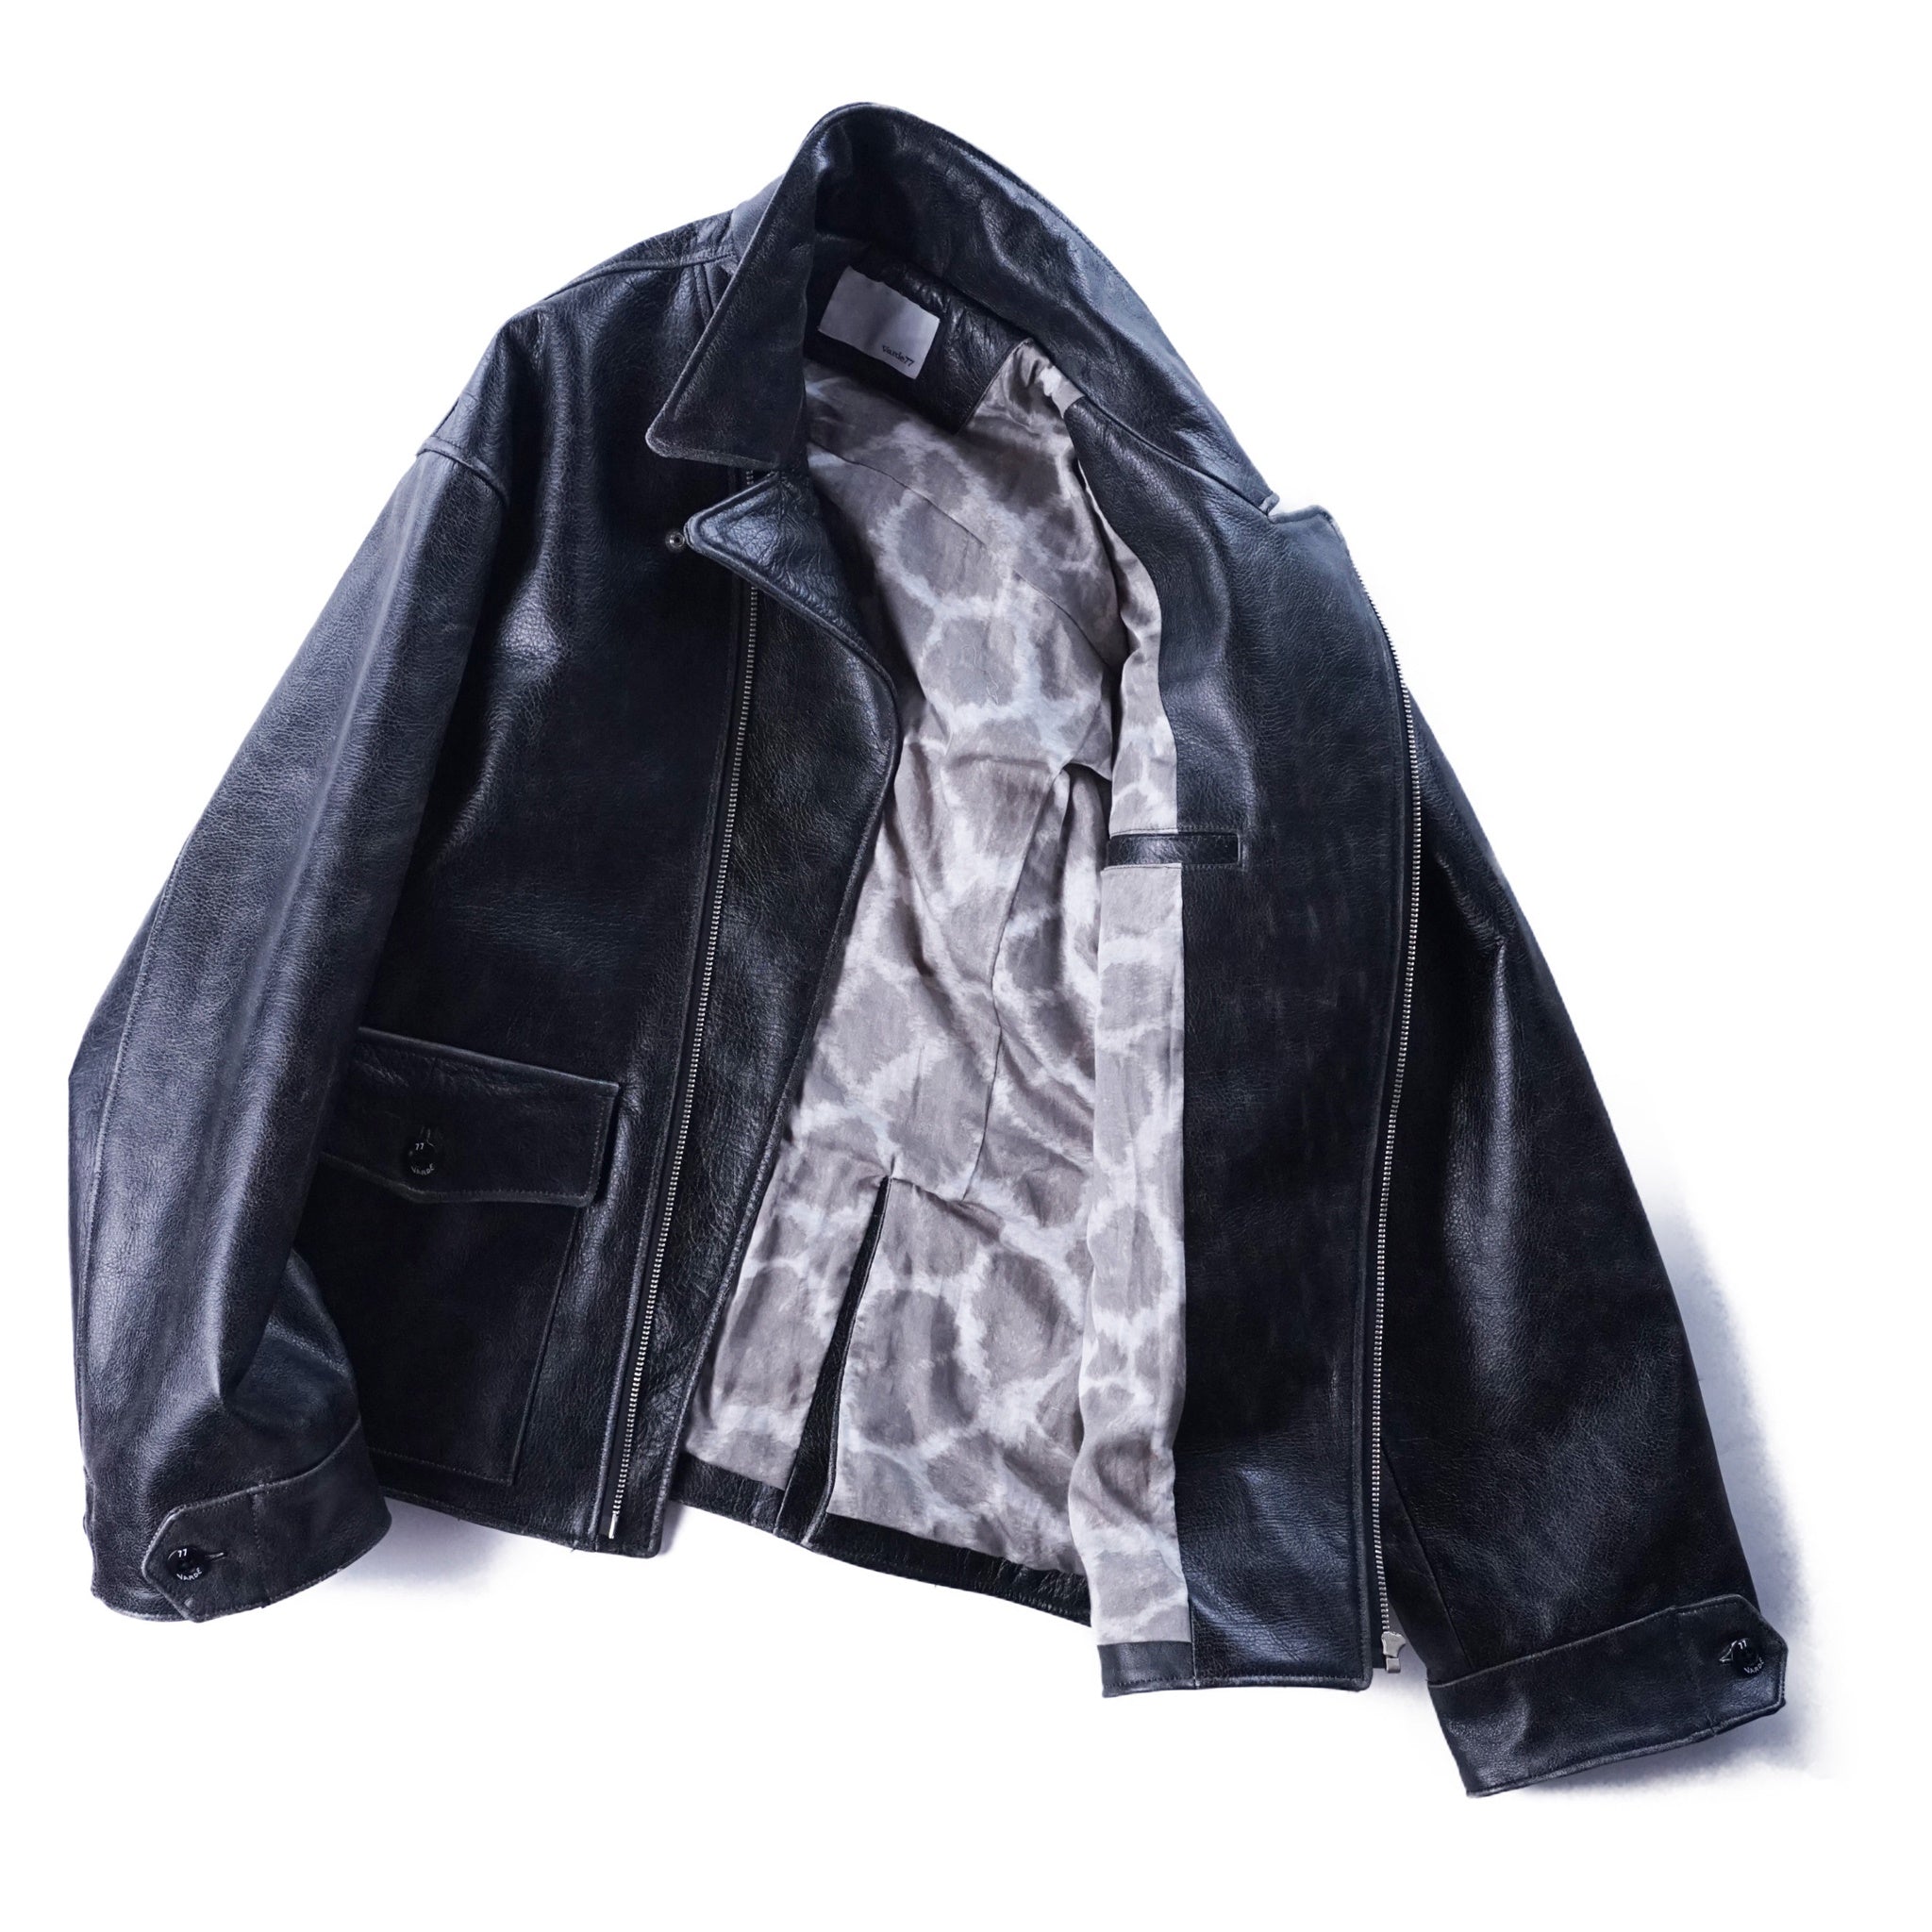 No:VR22SP-SD-LJ02 | Name:Crack leather double wide jacket | Color:Blac